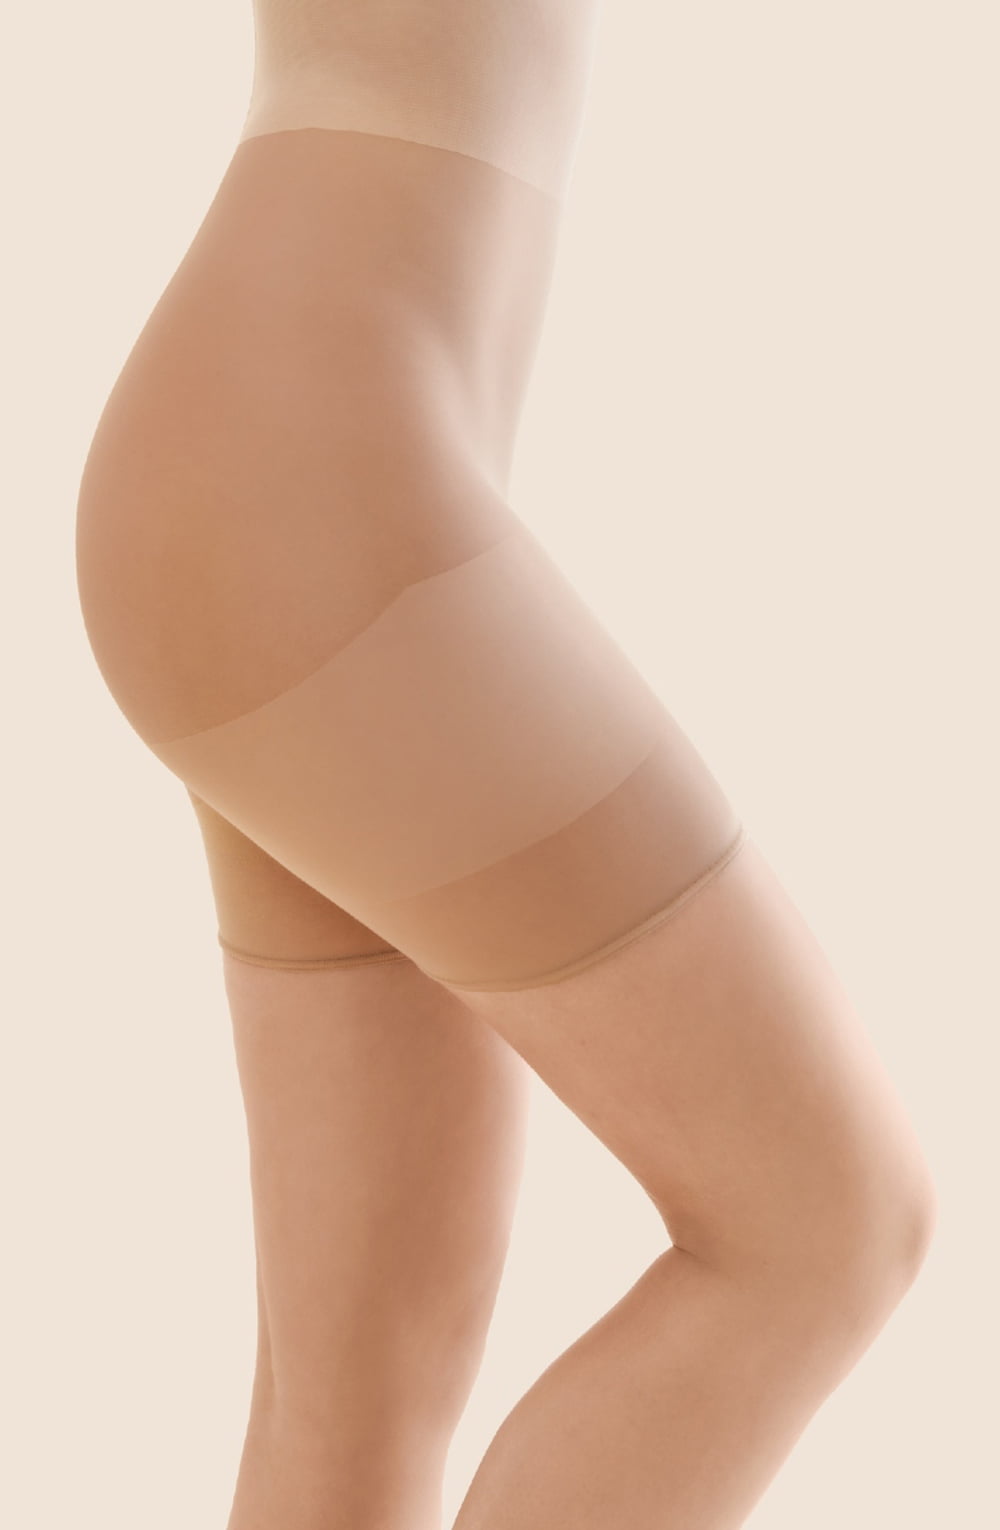 Elegant Beige Thigh Bands - Luxurious Gabriella Xenia 989 Panties for Refined Style